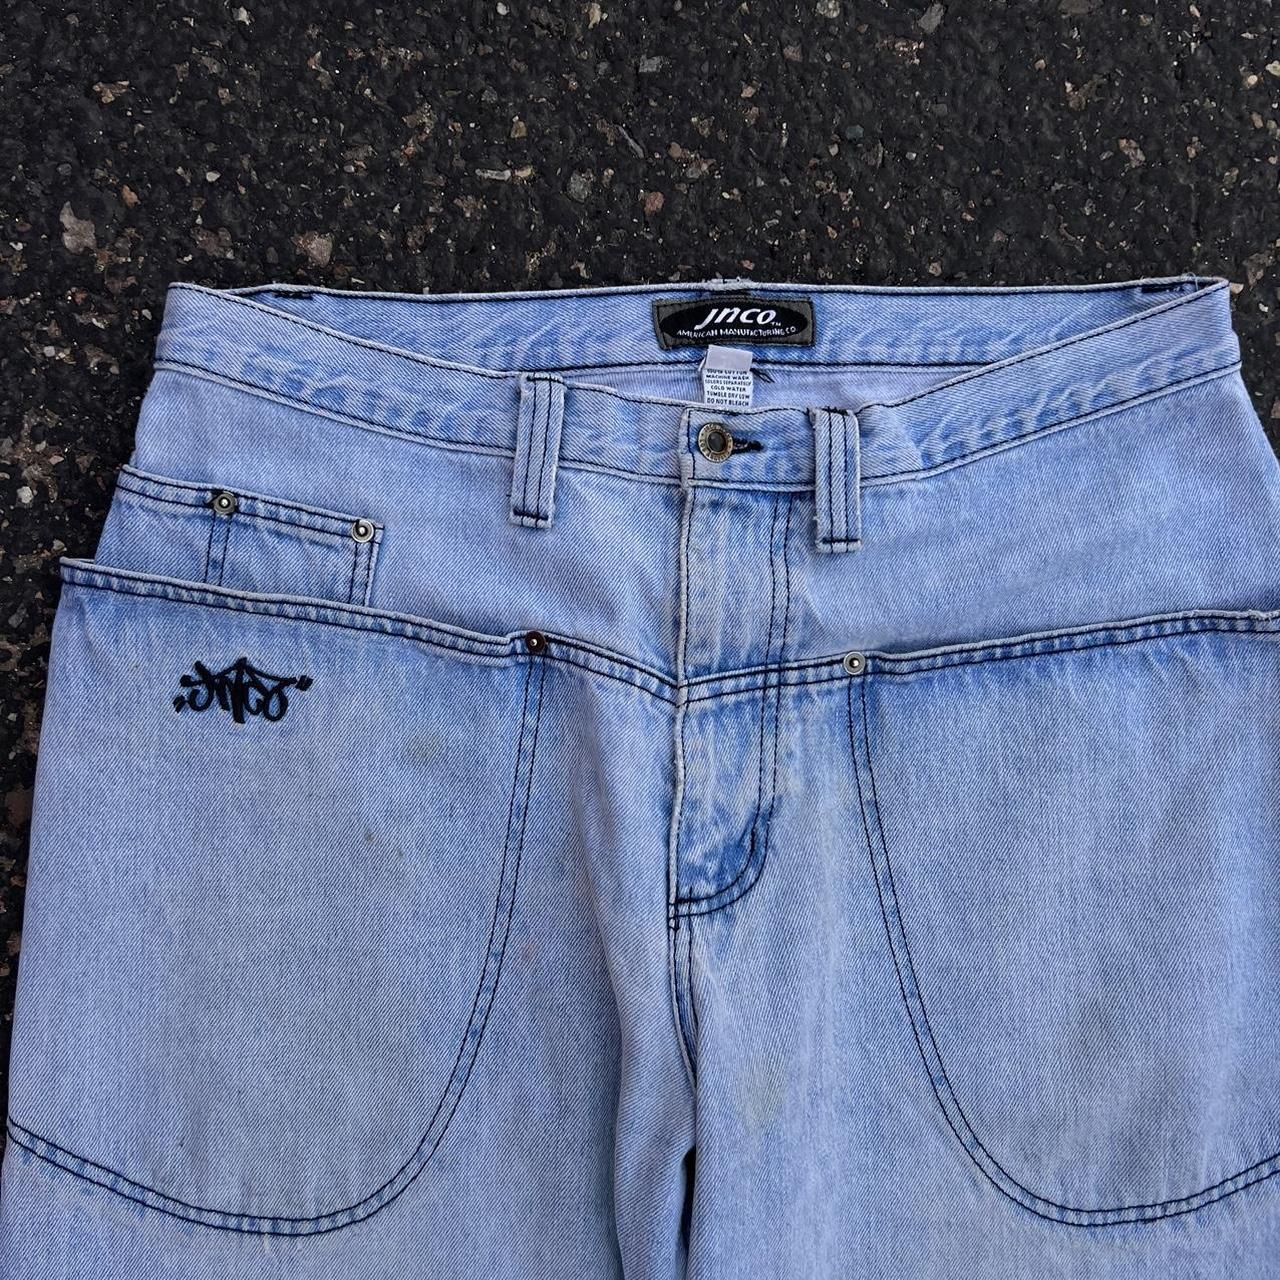 Fire jnco jeans. Vintage 90s embroidered jnco jeans... - Depop